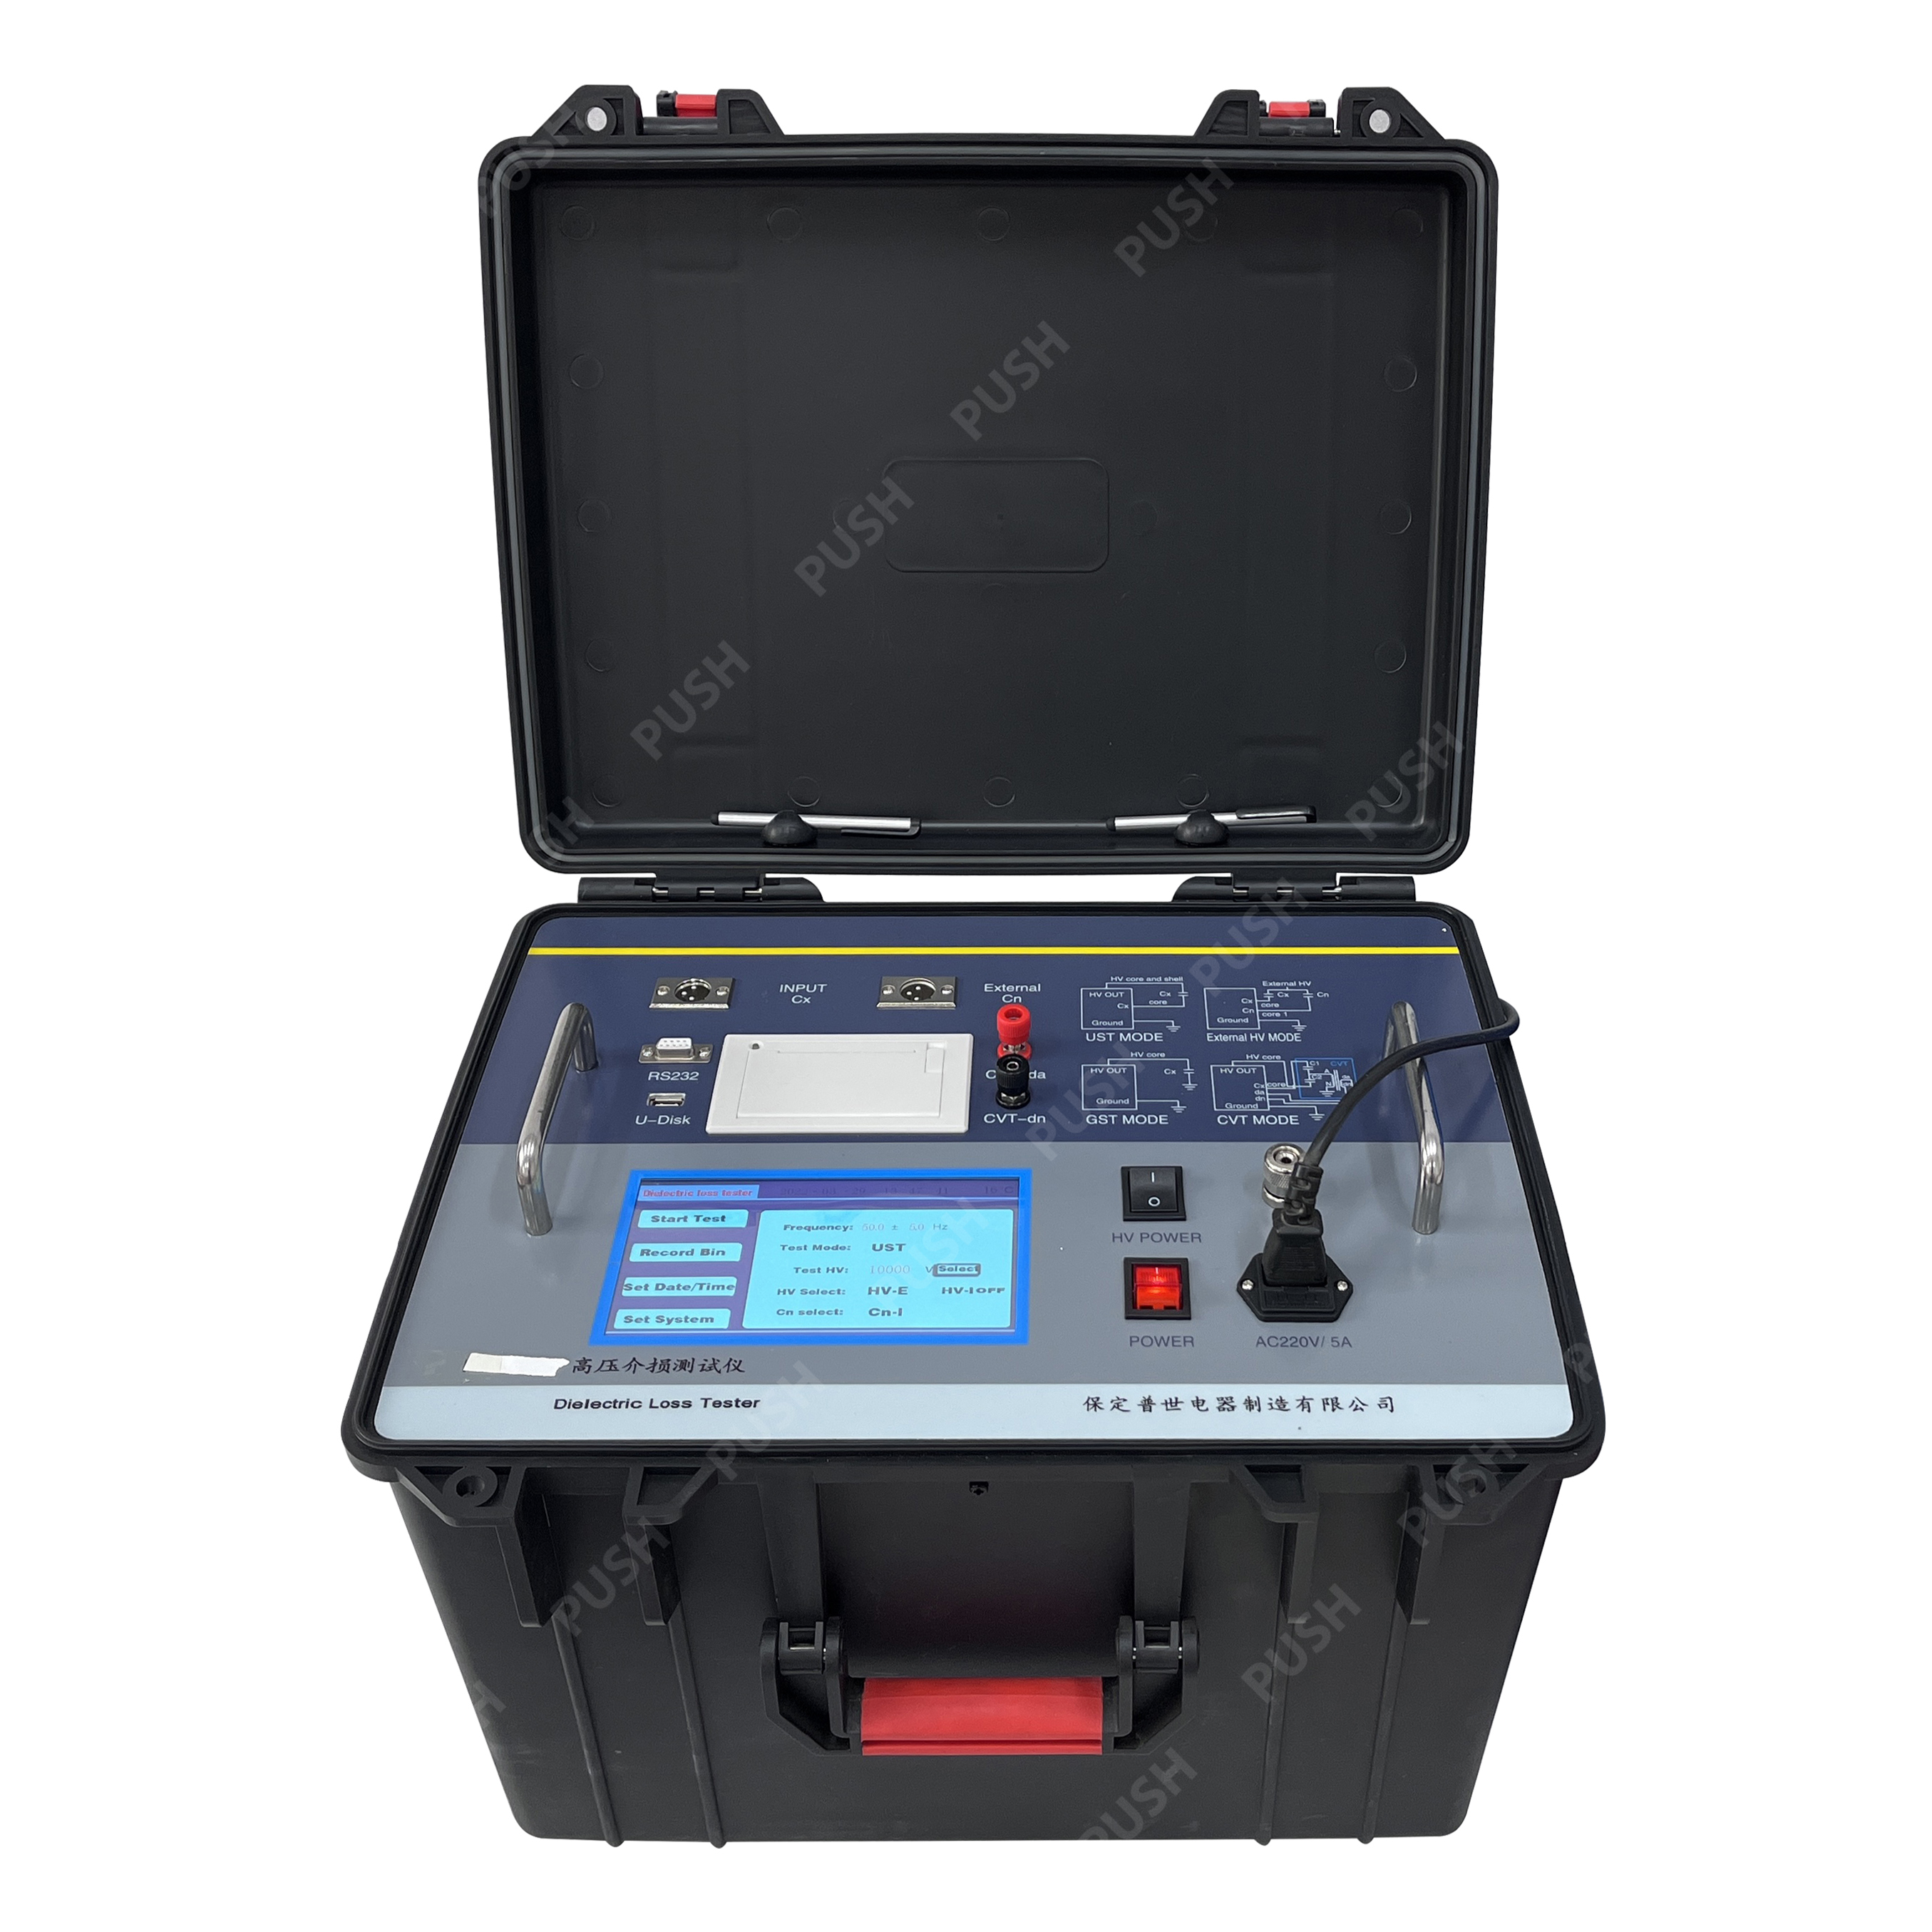 PS-JSEA1 high voltage Dielectric Loss Tester